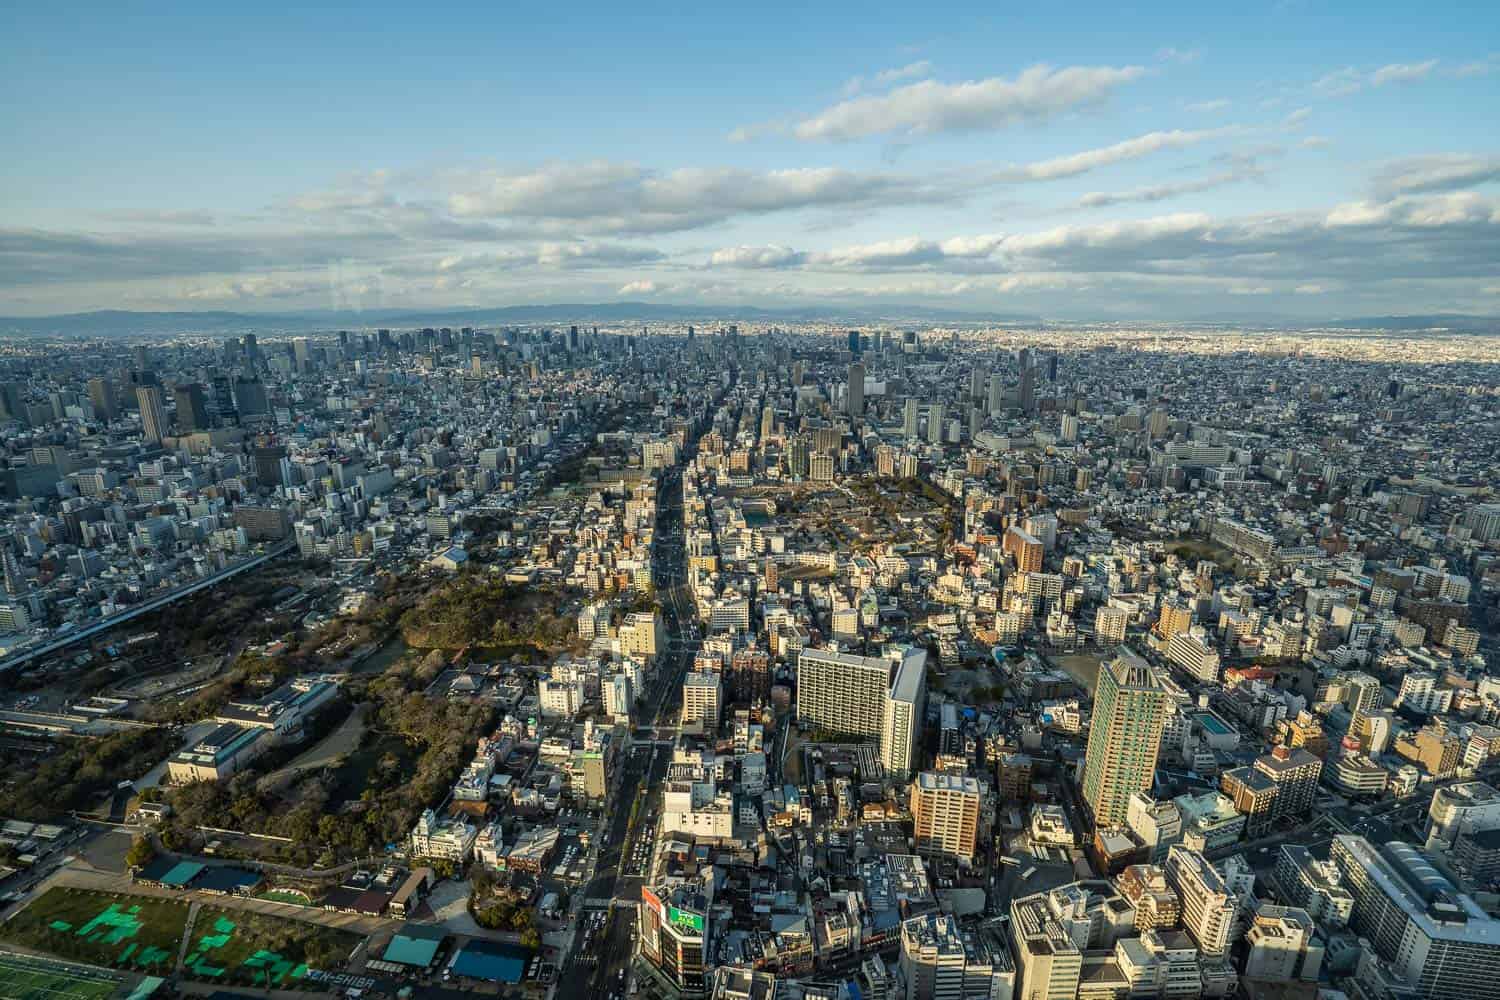 View of Osaka from Abeno Harukas 300 observatory in late afternoon